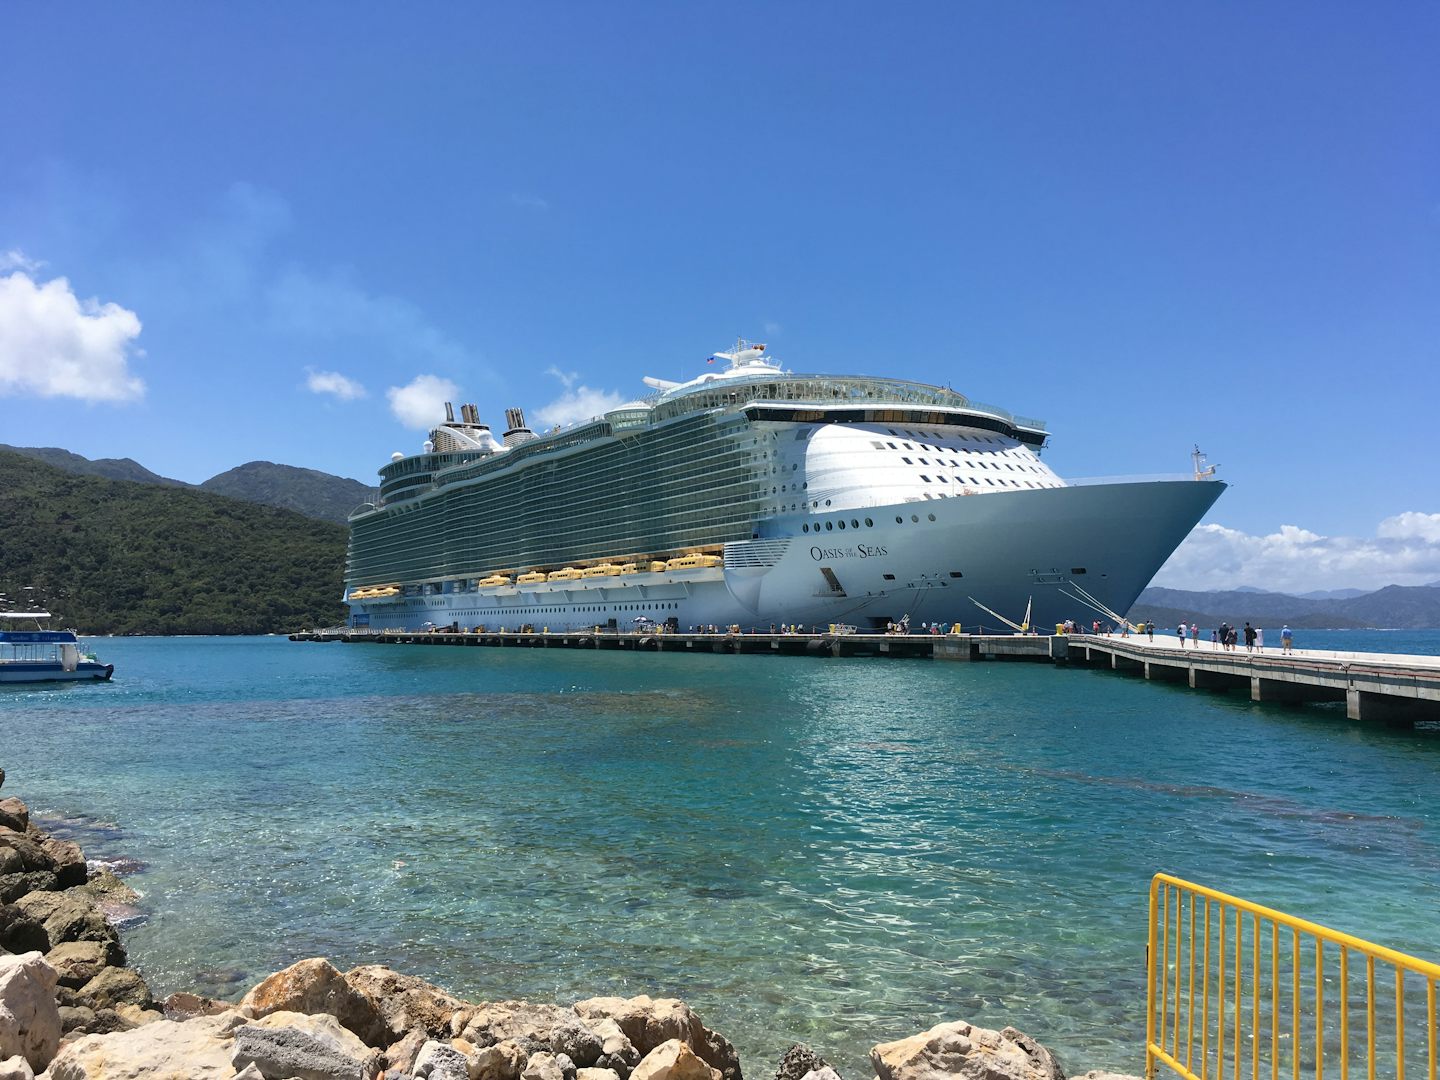 Docked in Labadee